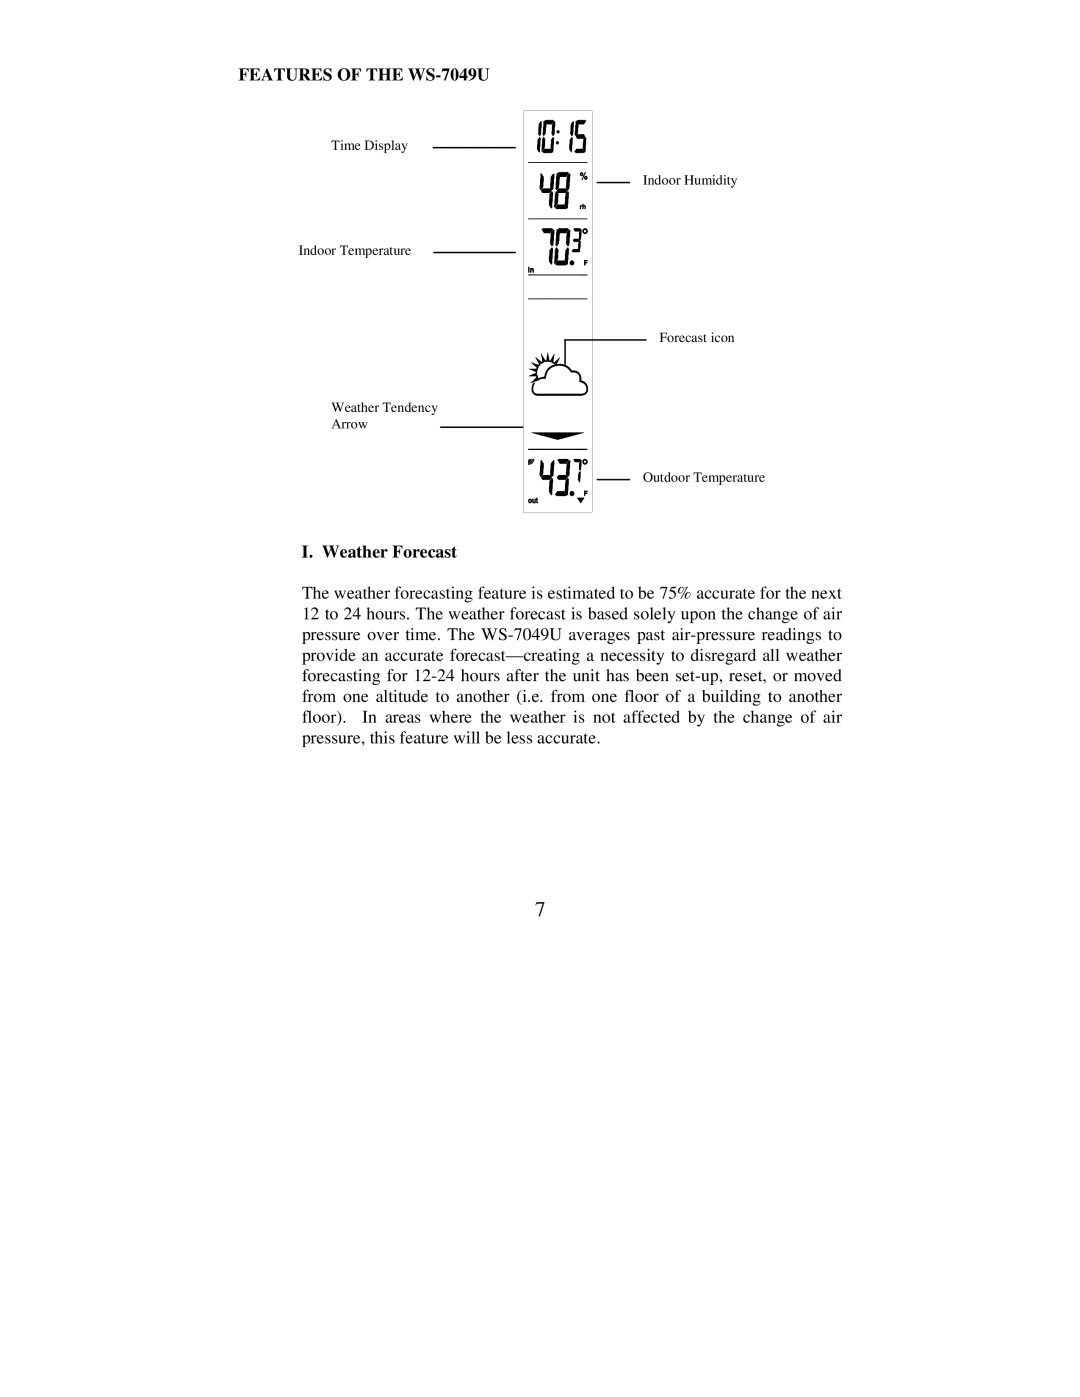 La Crosse Technology instruction manual Features of the WS-7049U, Weather Forecast 